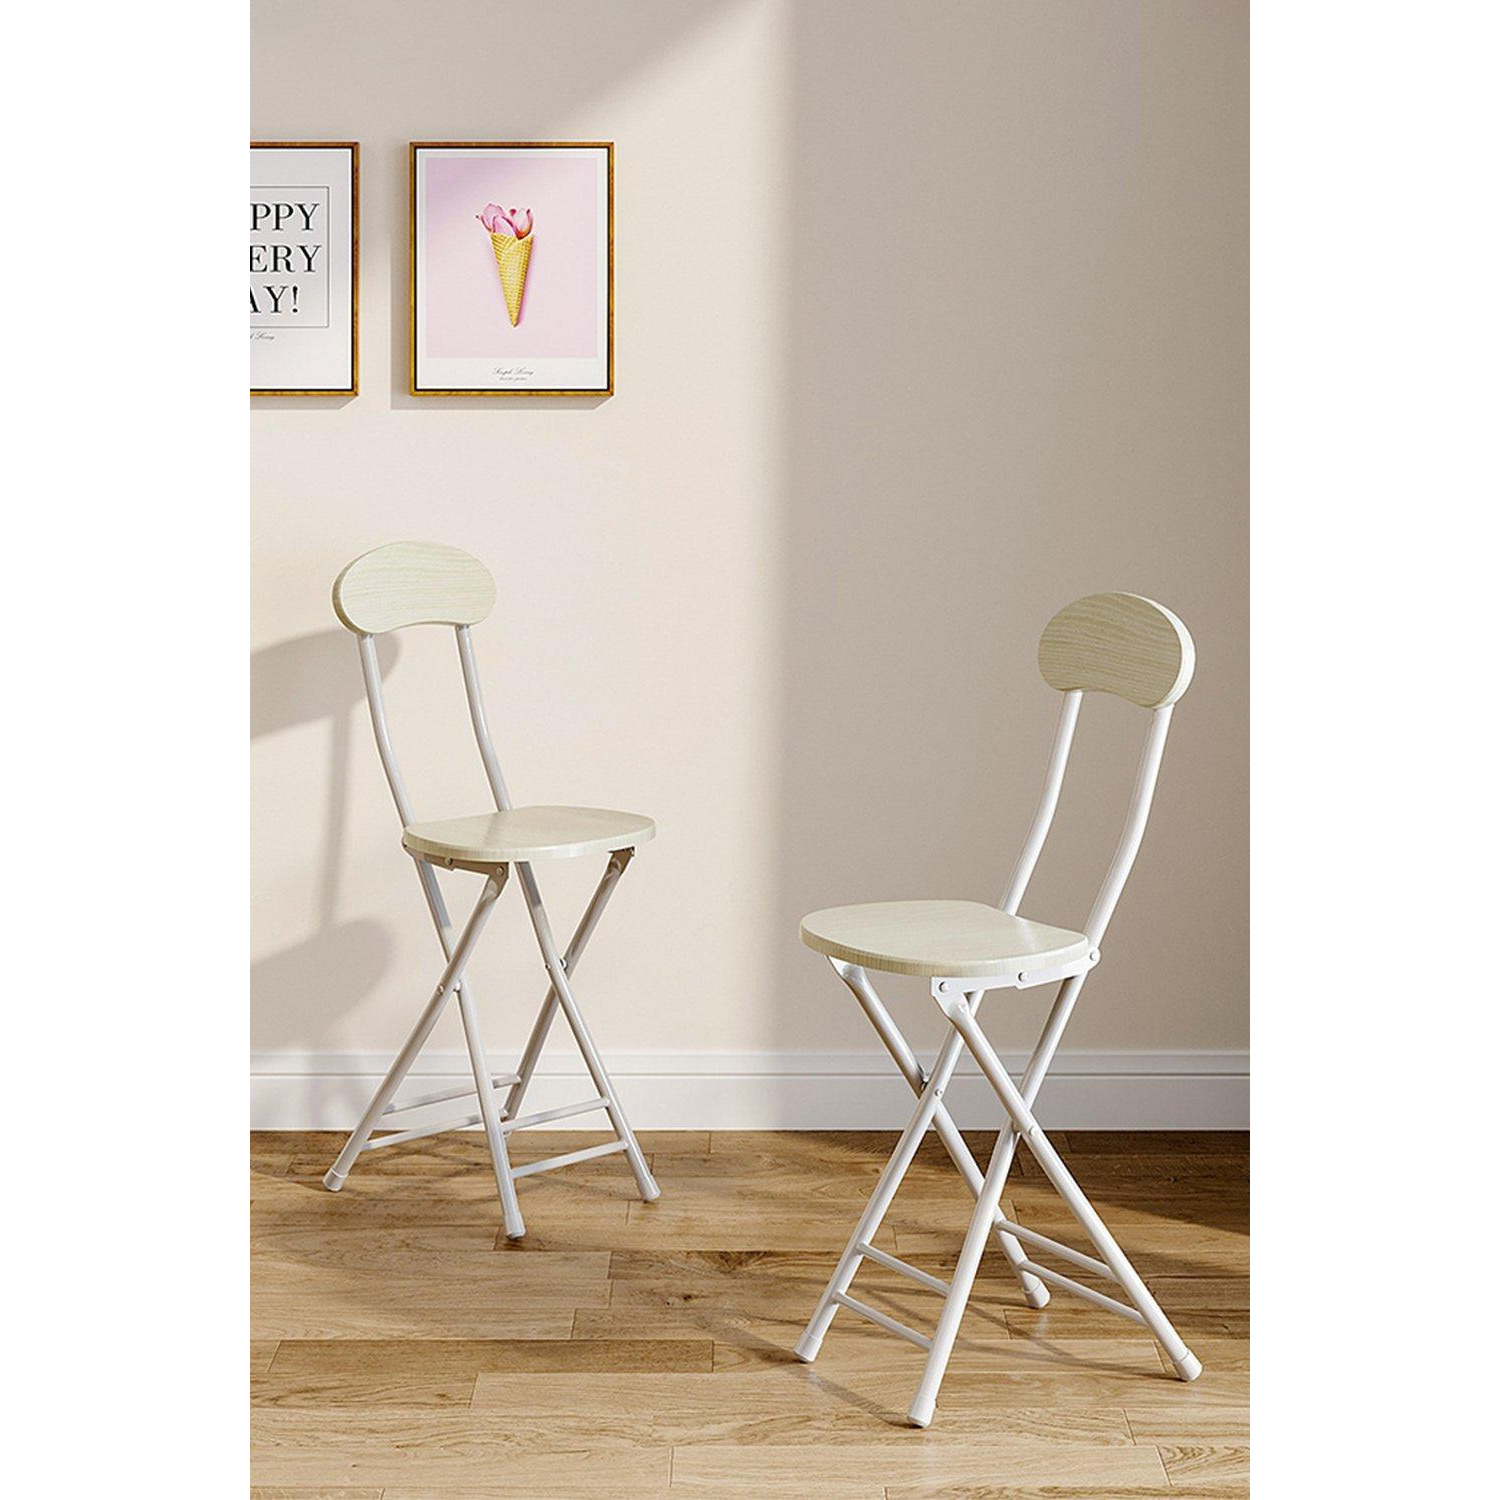 Set of 2 Compact Wooden White Folding Chair with Metal Legs - image 1